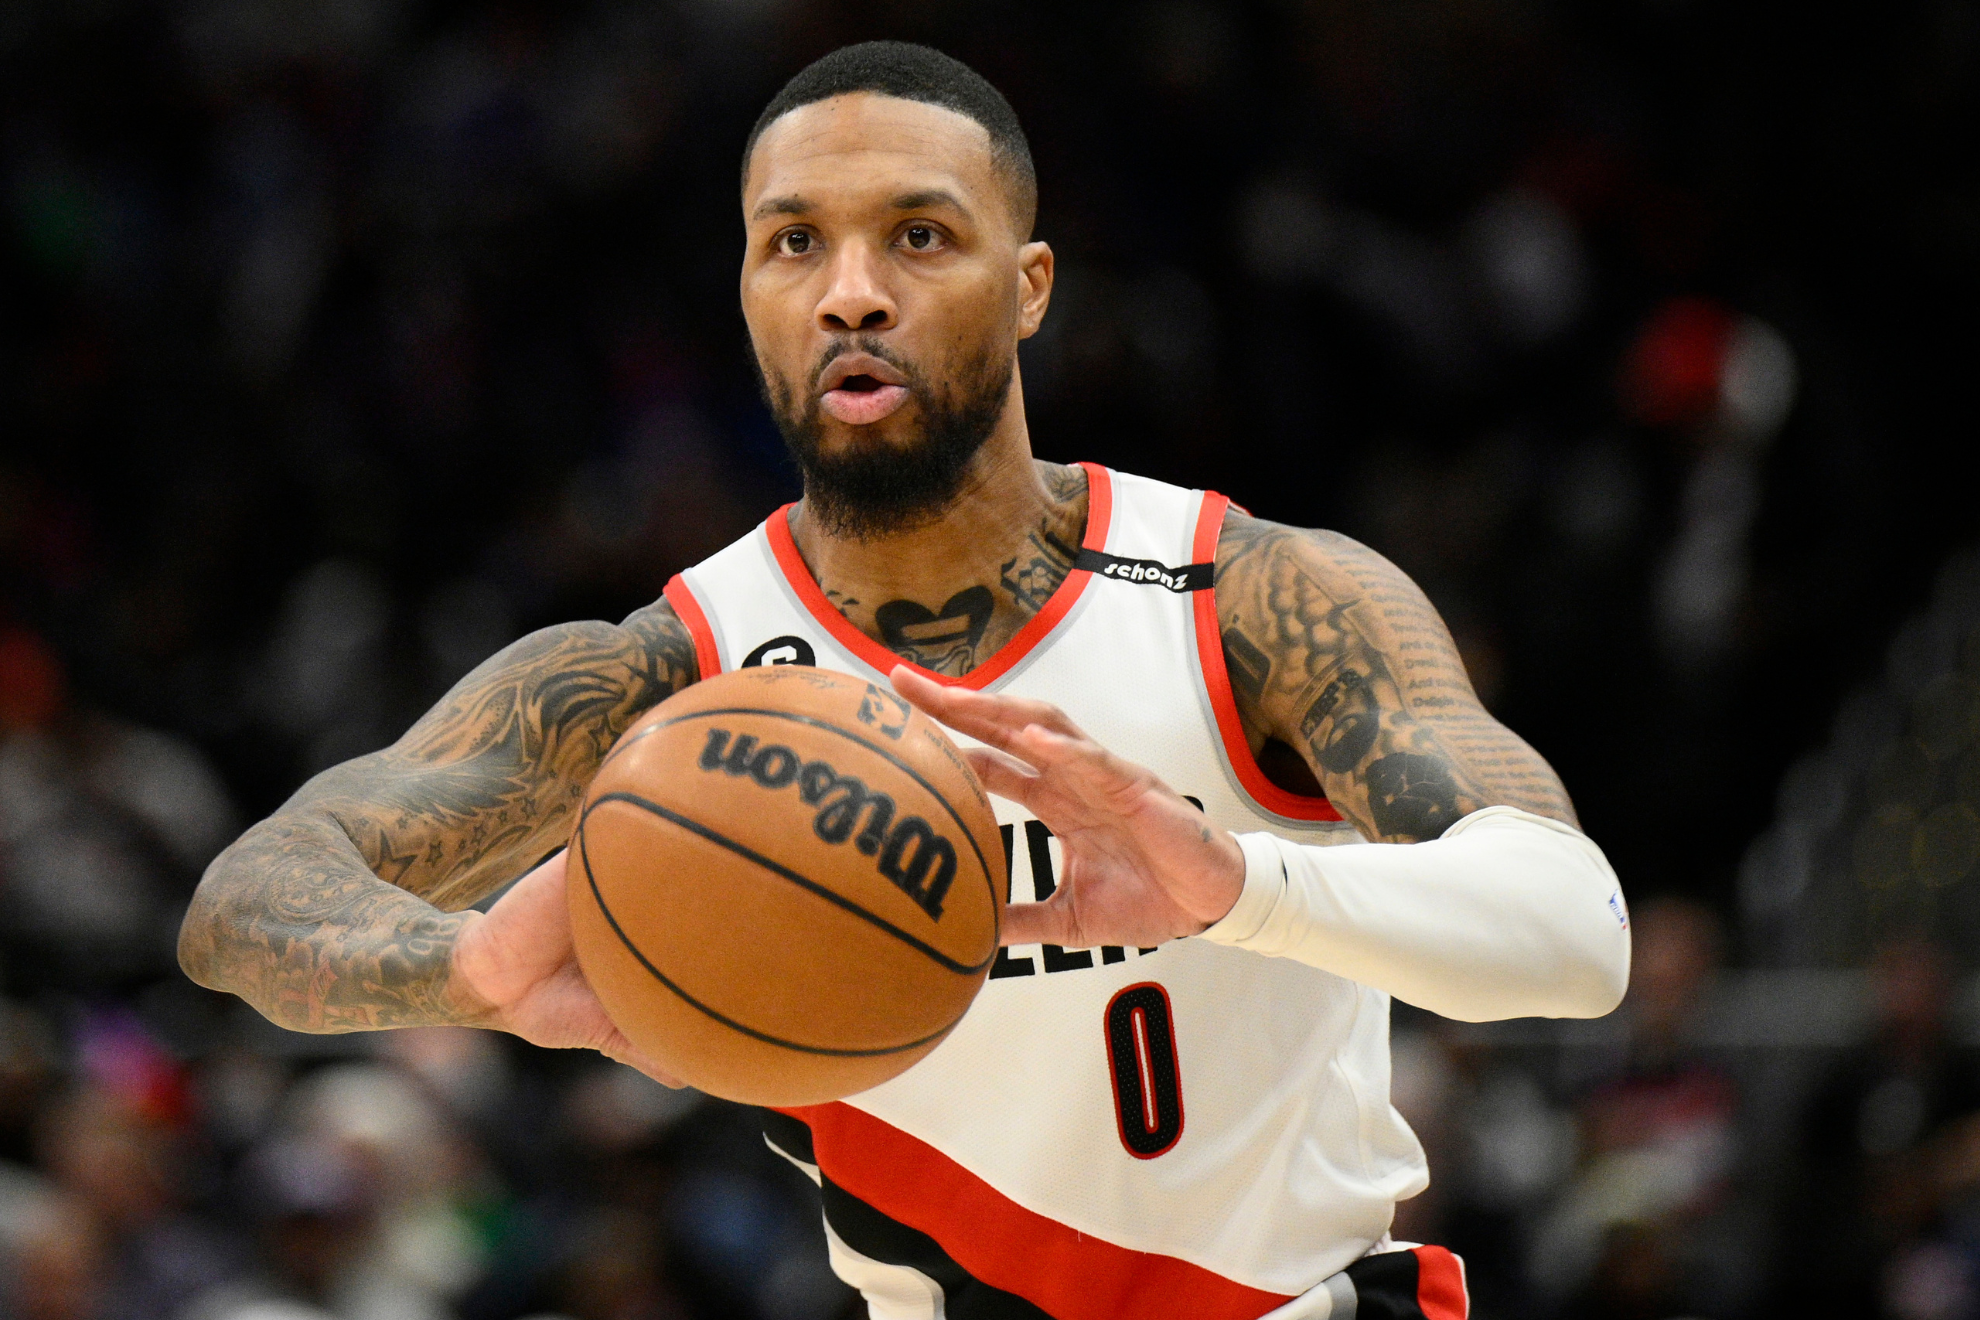 Will Portland make it easy for Dame to leave?